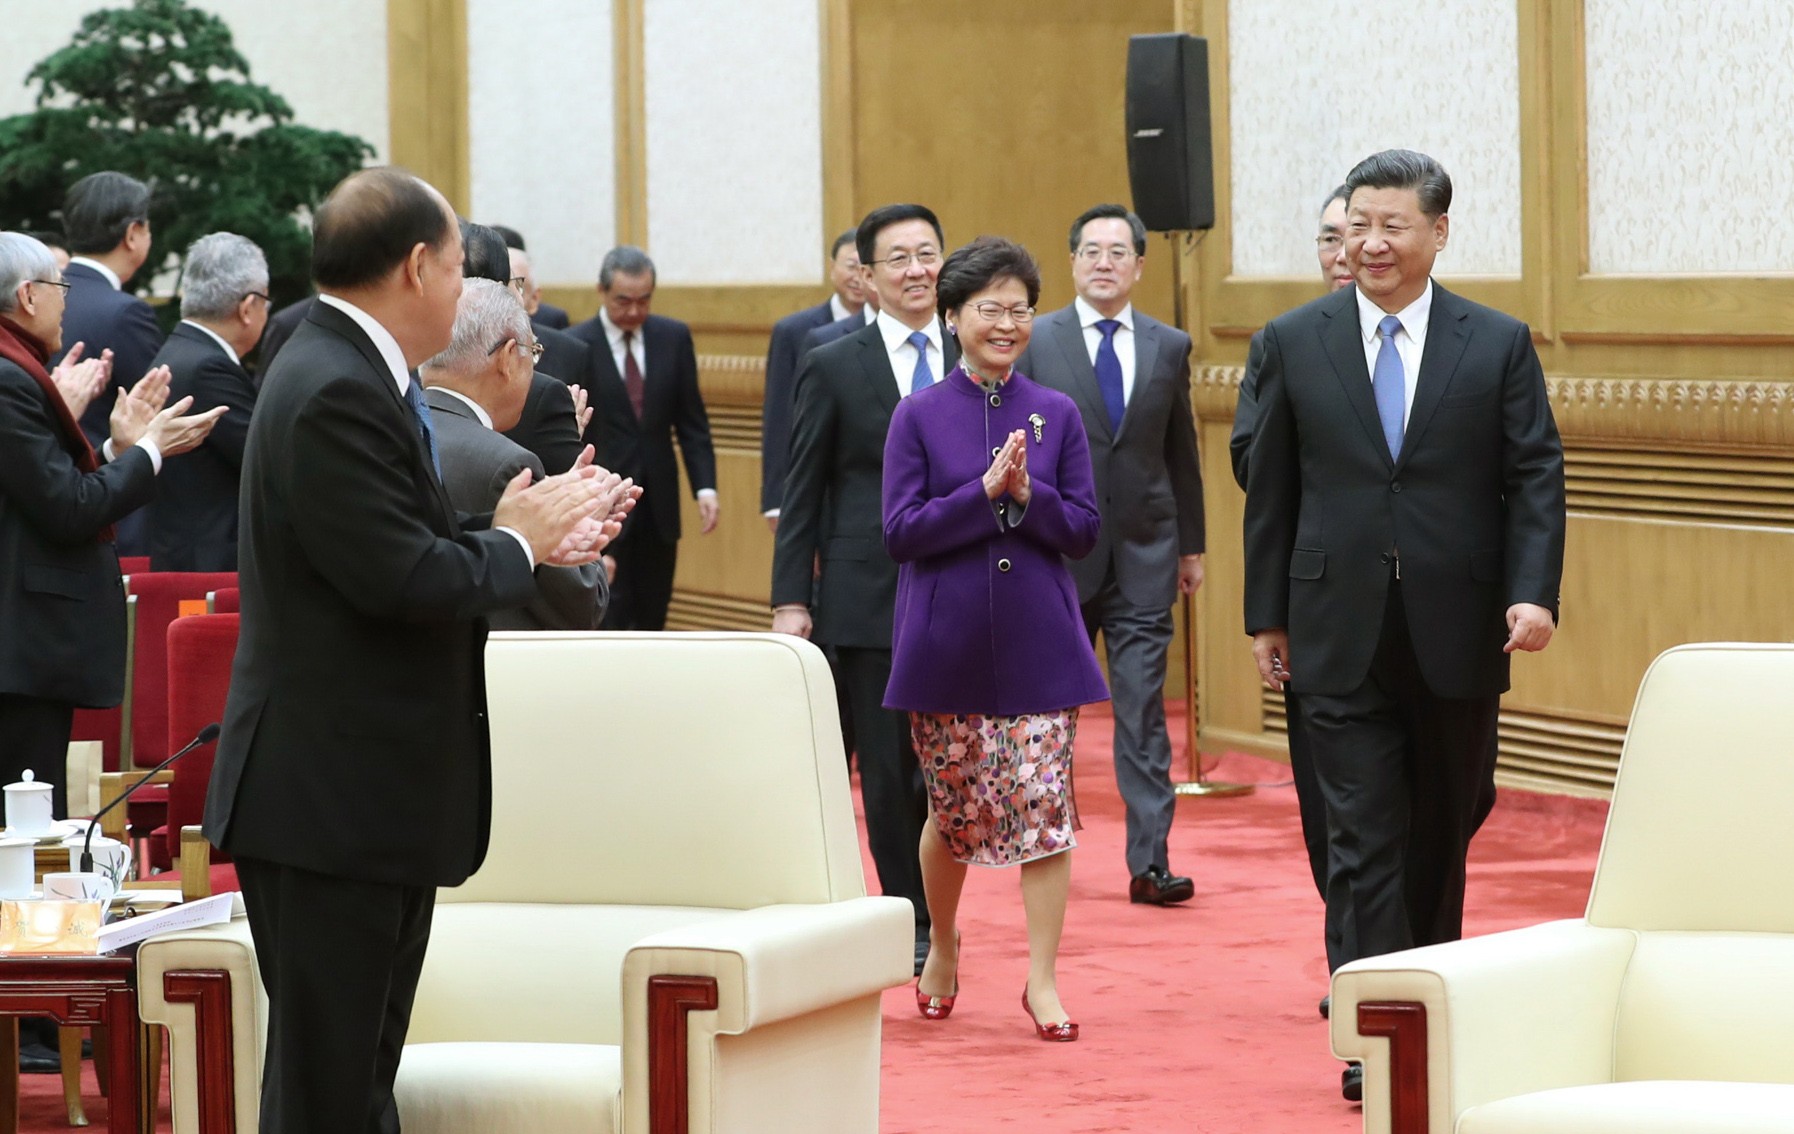 Chief Executive Carrie Lam leads the way for delegates from Hong Kong and Macau, as Chinese President Xi Jinping meets representatives from the two special administrative regions, in Beijing in November 2018. Photo: Xinhua